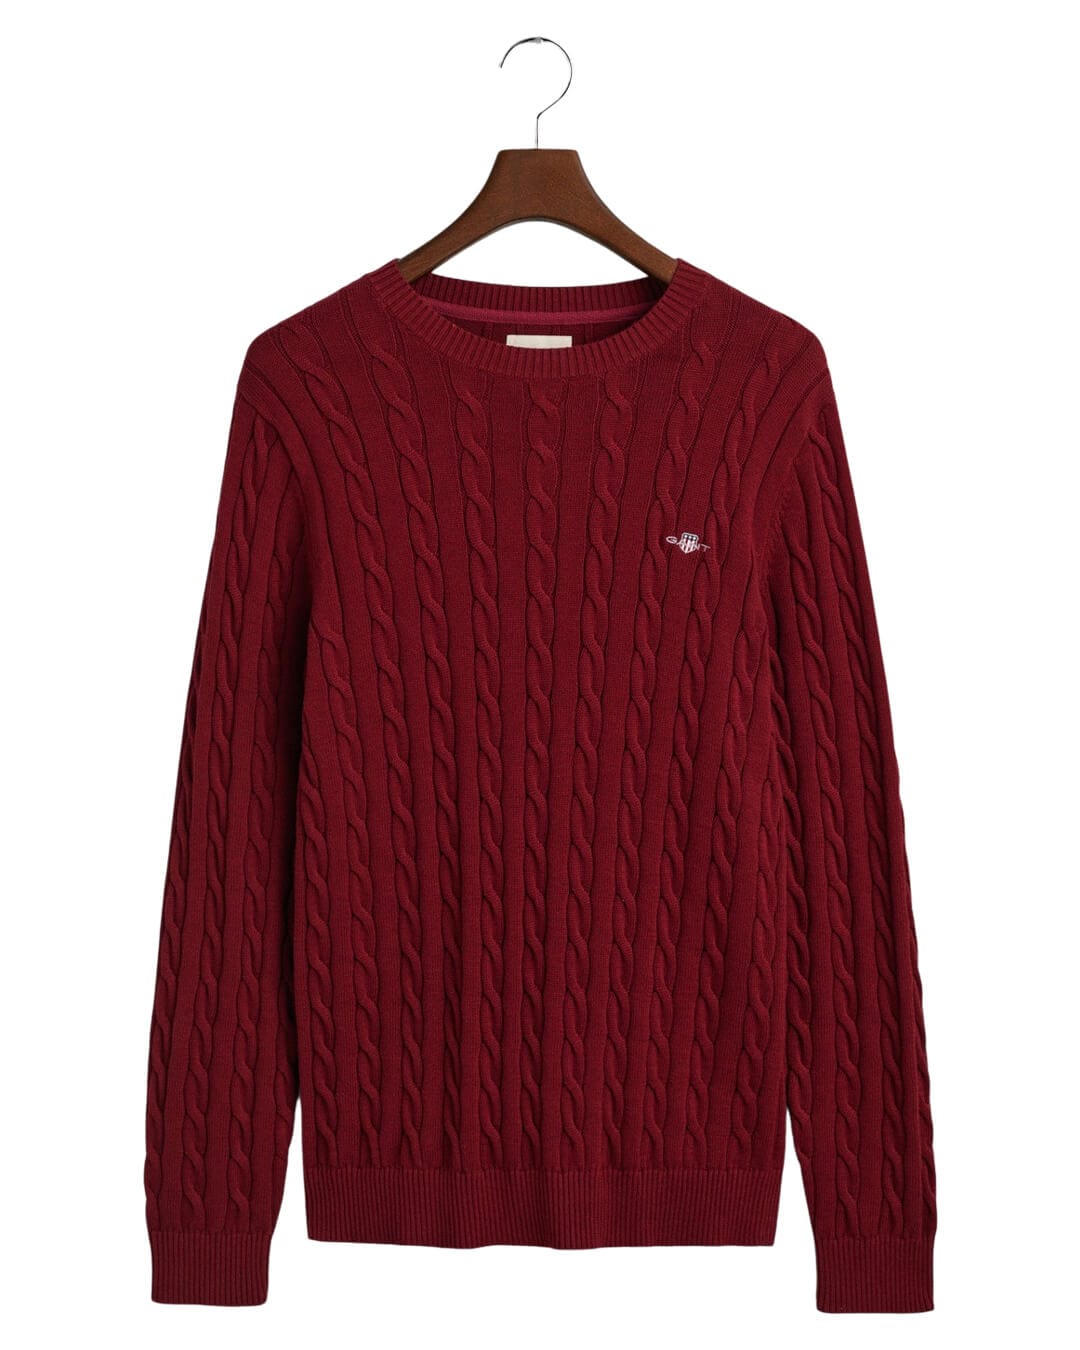 Gant Jumpers Gant Plumped Red Cotton Cable Knit Crew Neck Sweater